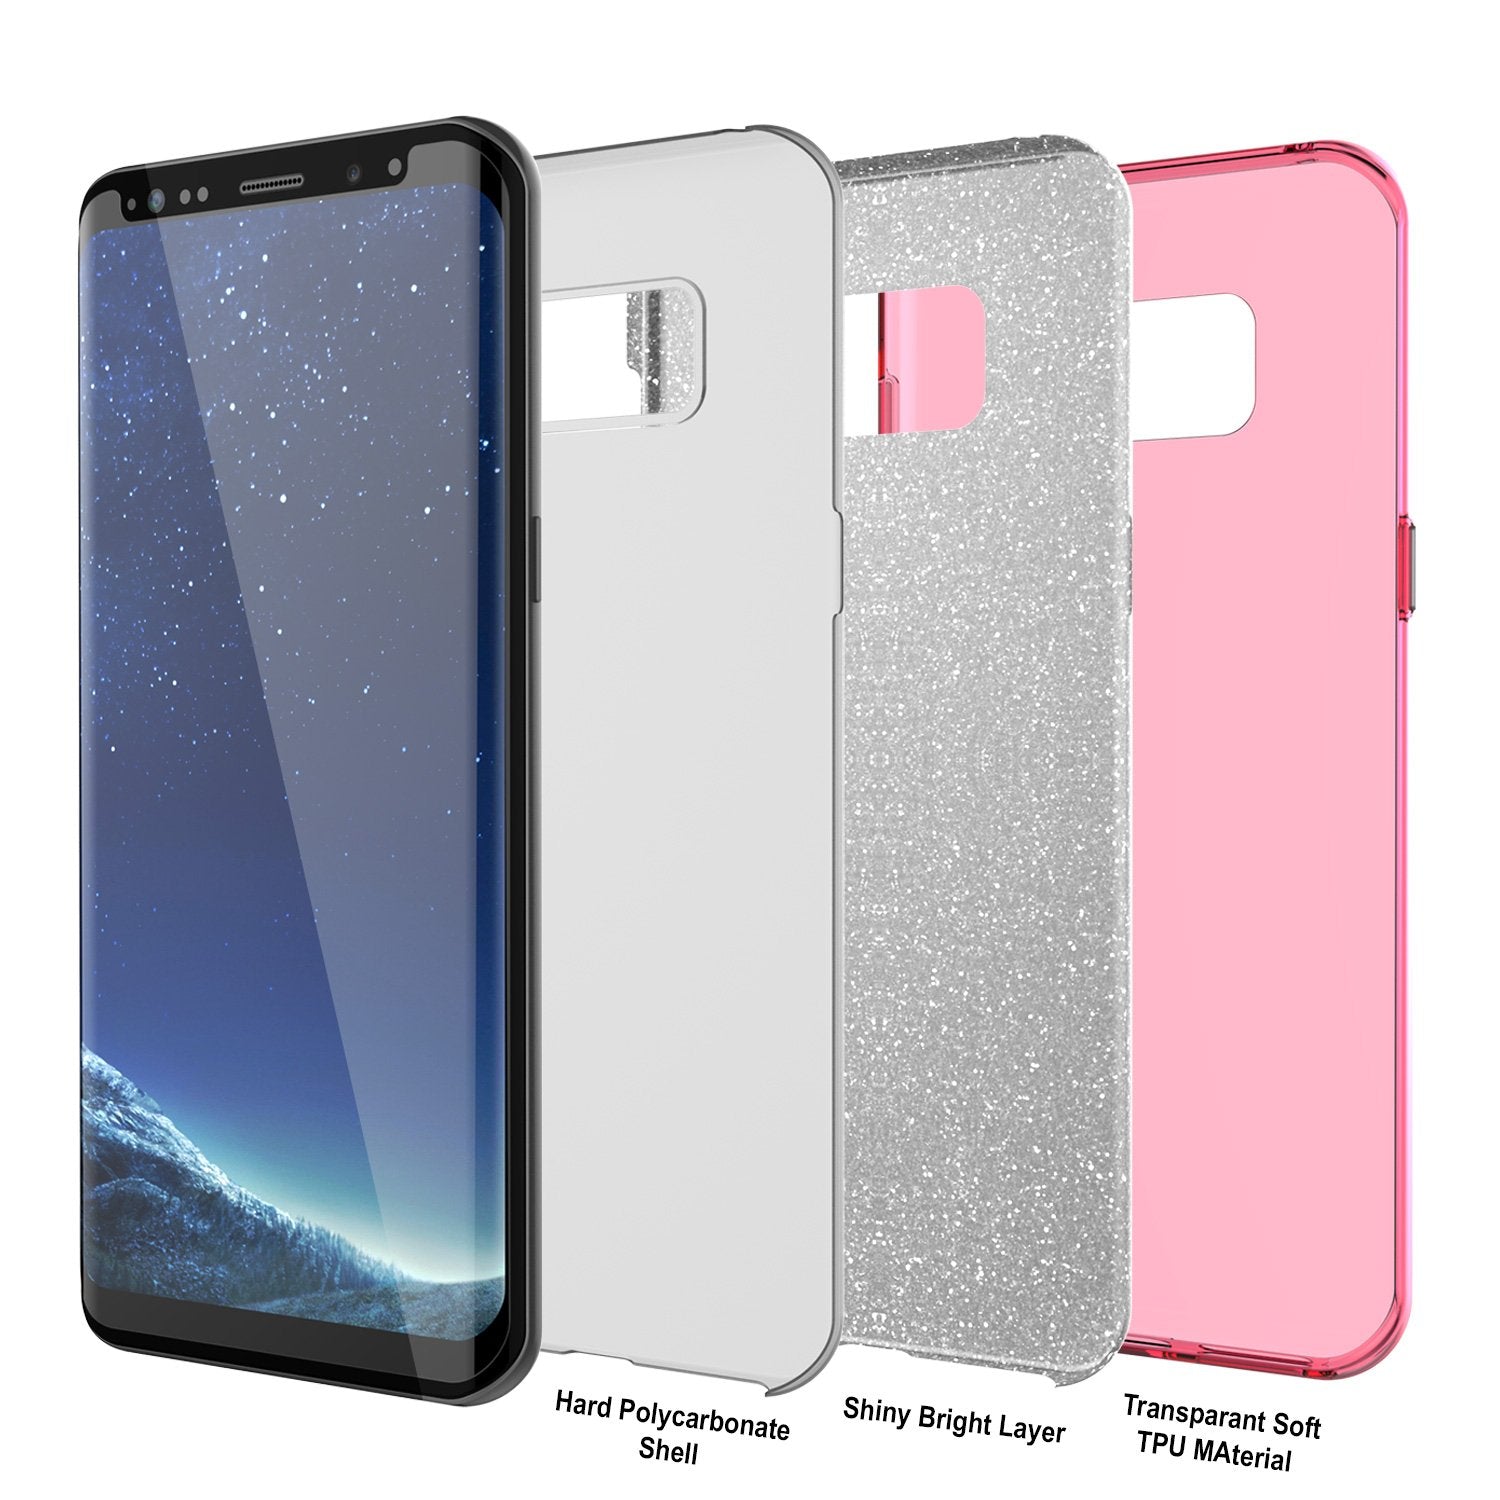 Galaxy S8 Plus Case, Punkcase Galactic 2.0 Series Ultra Slim Protective Armor TPU Cover [Pink]